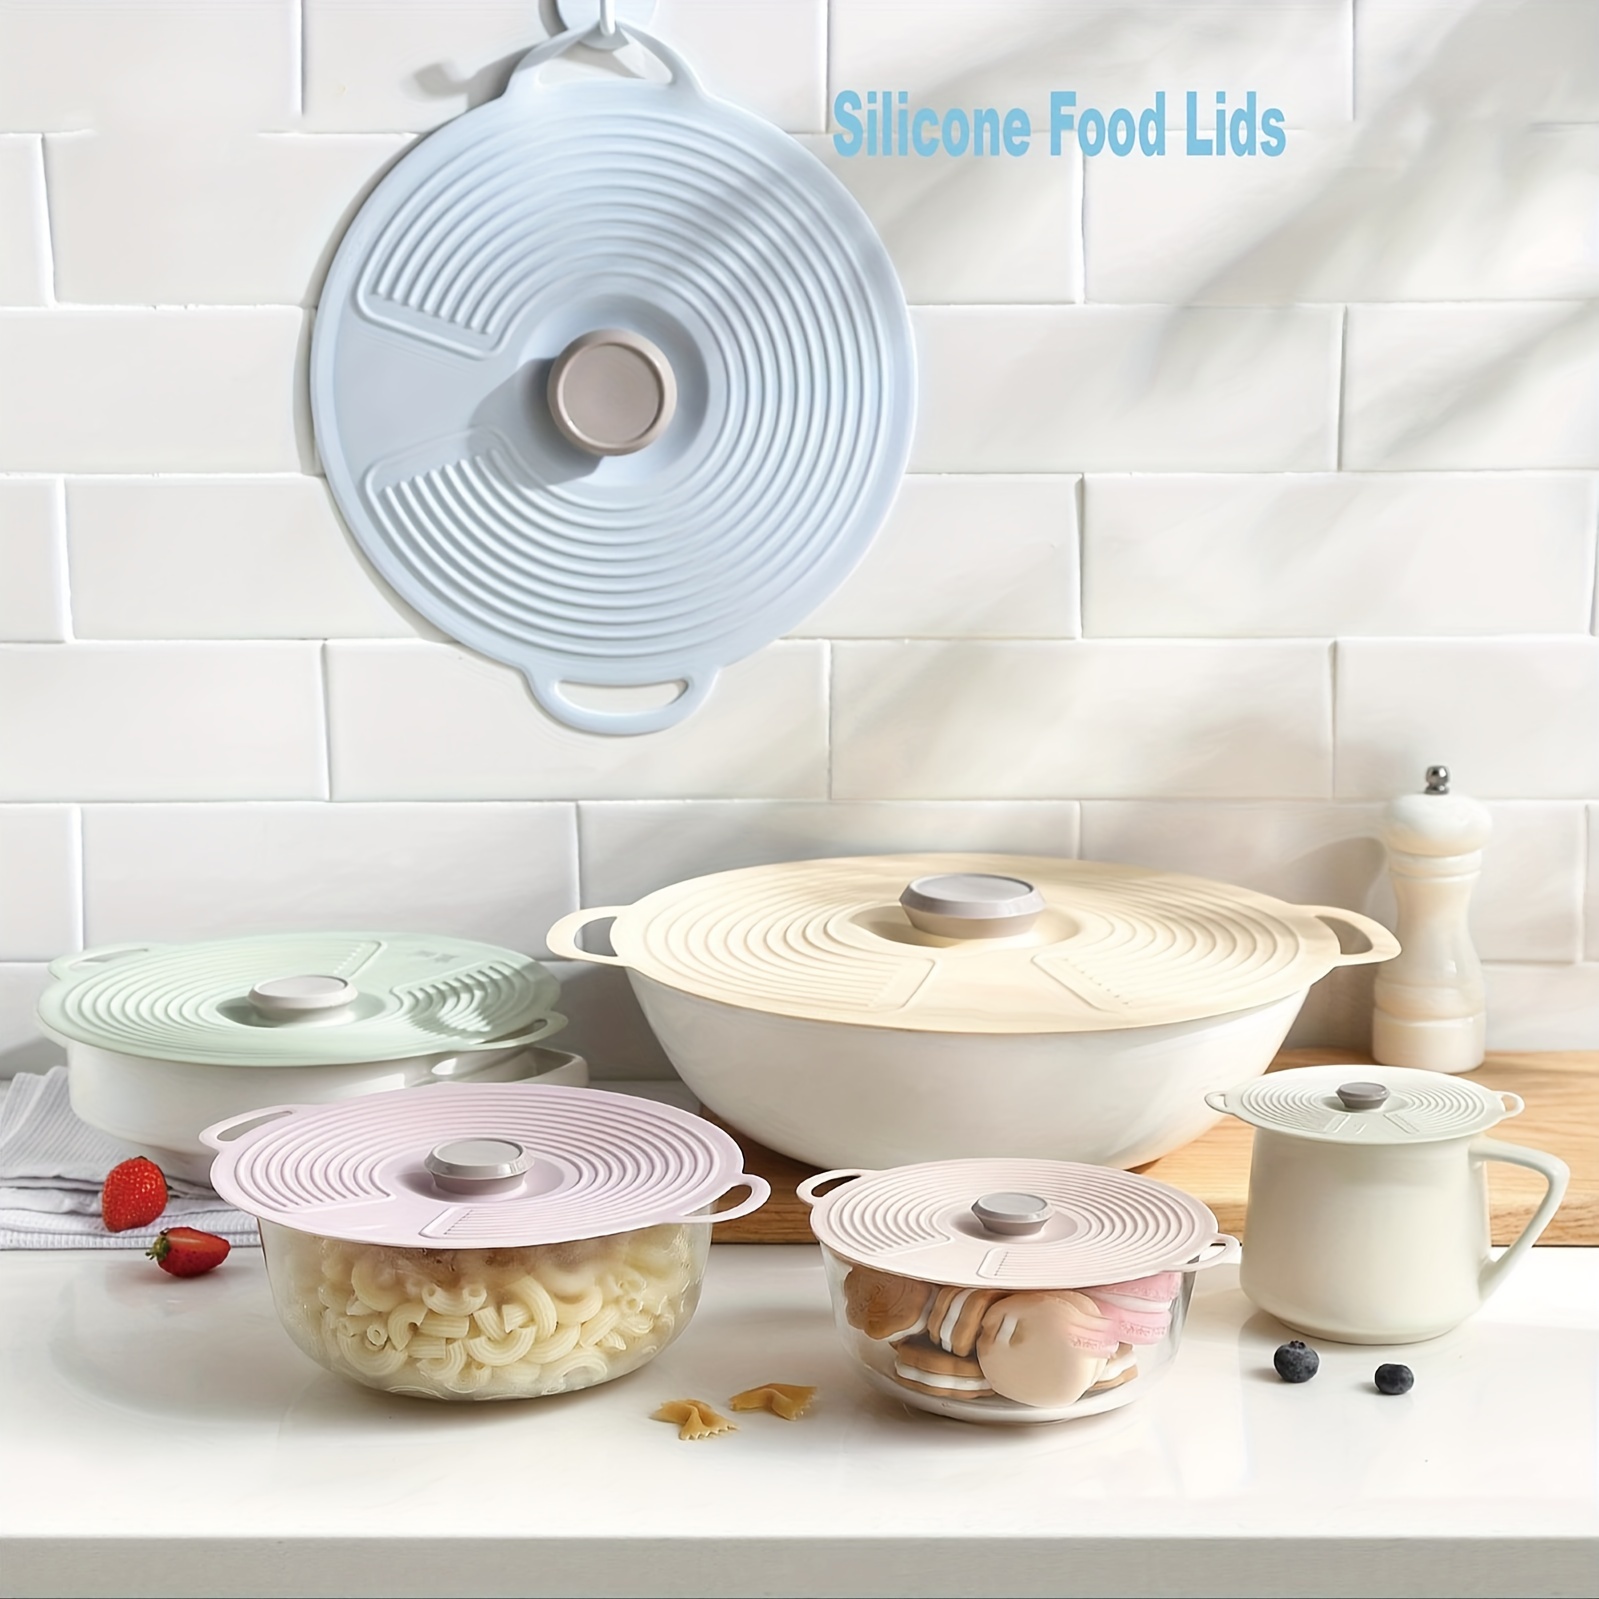 Silicone Covers That Can Be Reused For Microwave Food Storage With